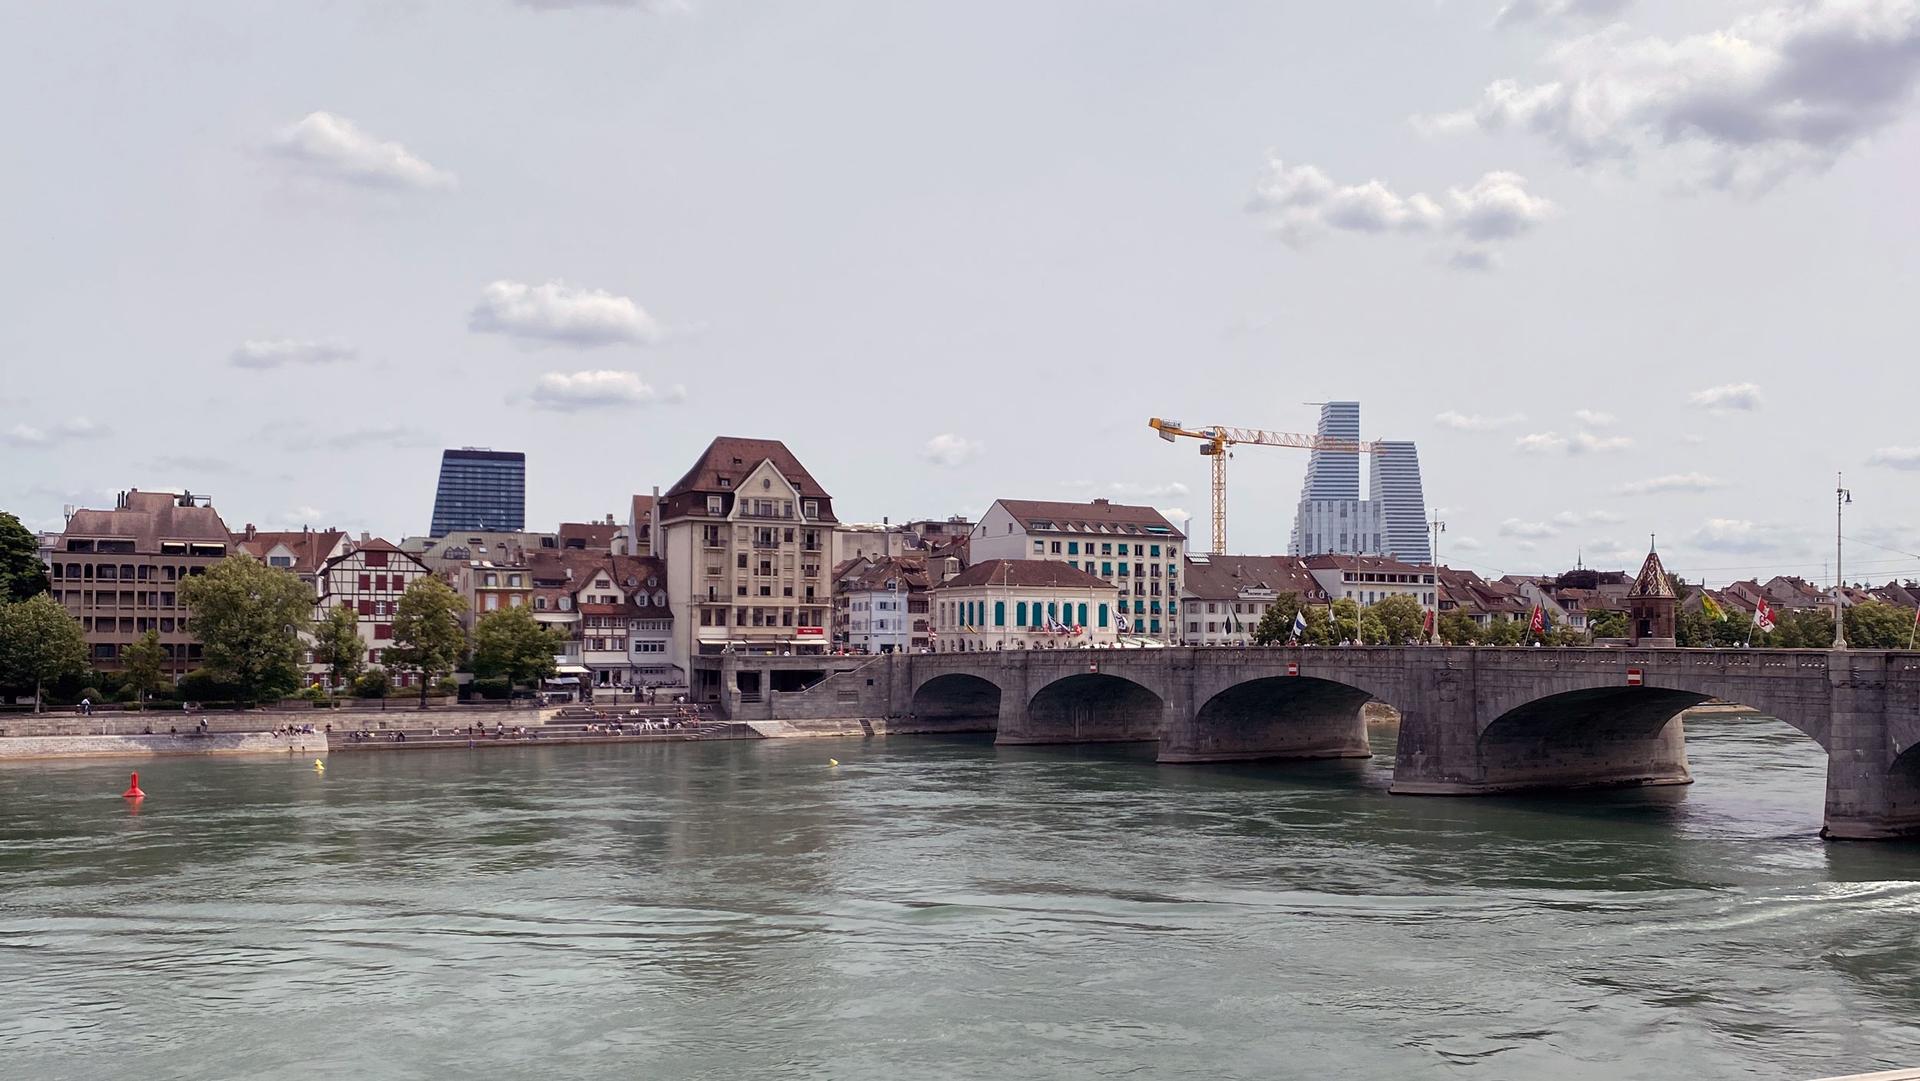 The Rhine River passes through Basel, a Swiss city that sits near the borders of Germany and France.